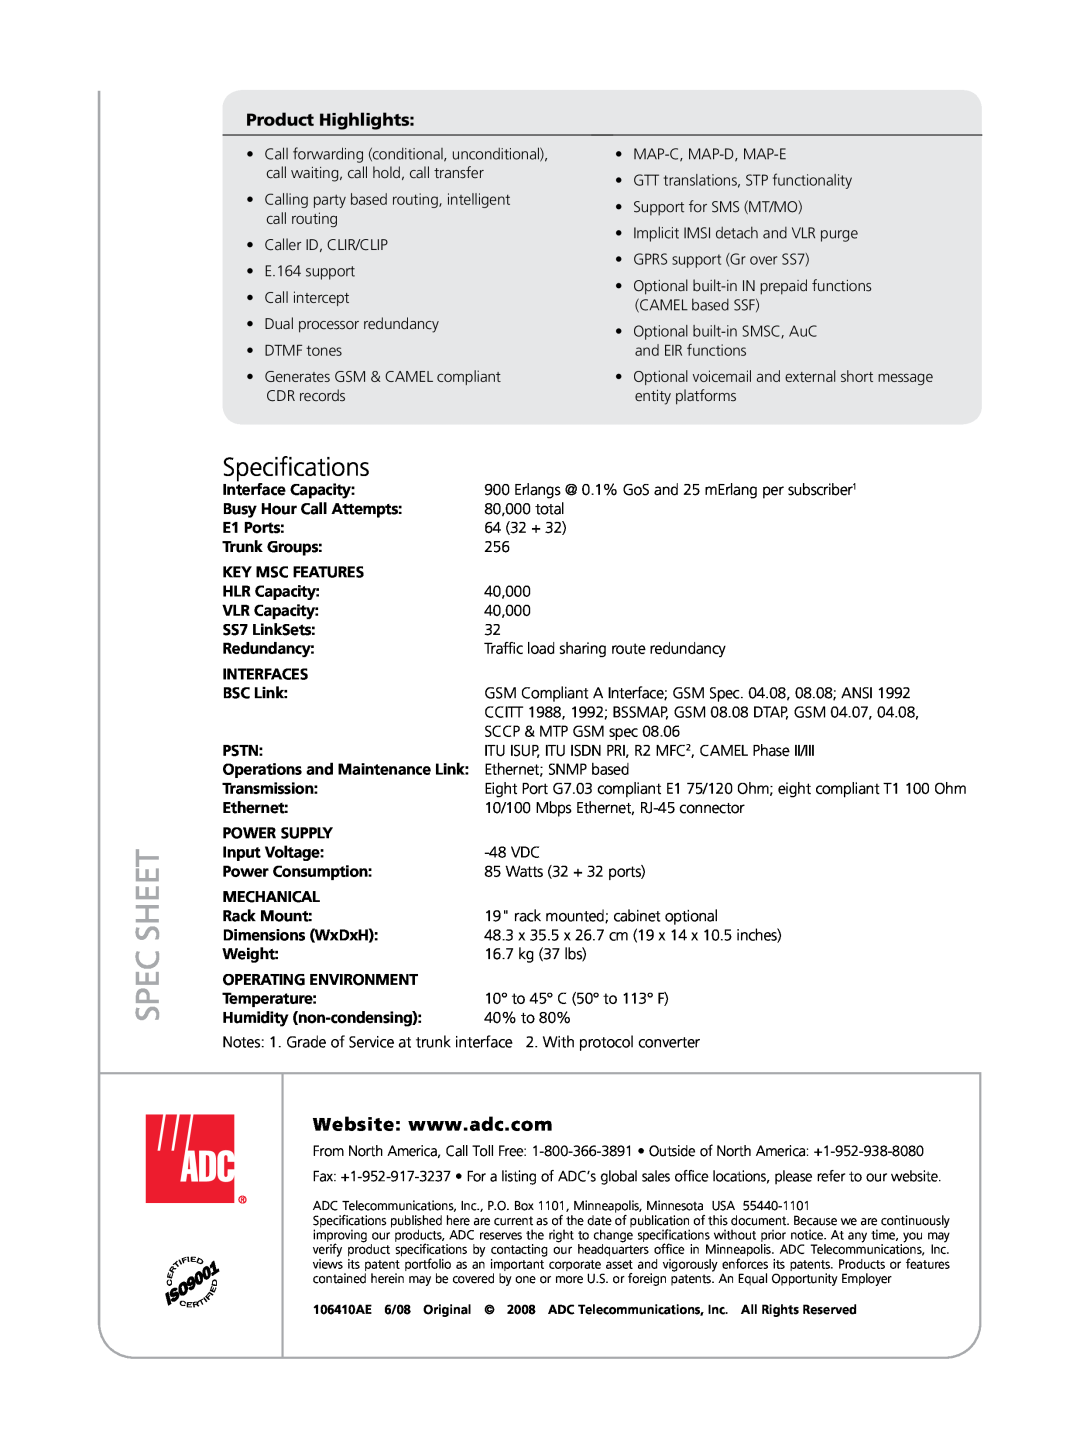 ADC X40 manual Specifications, Spec Sheet, Product Highlights 